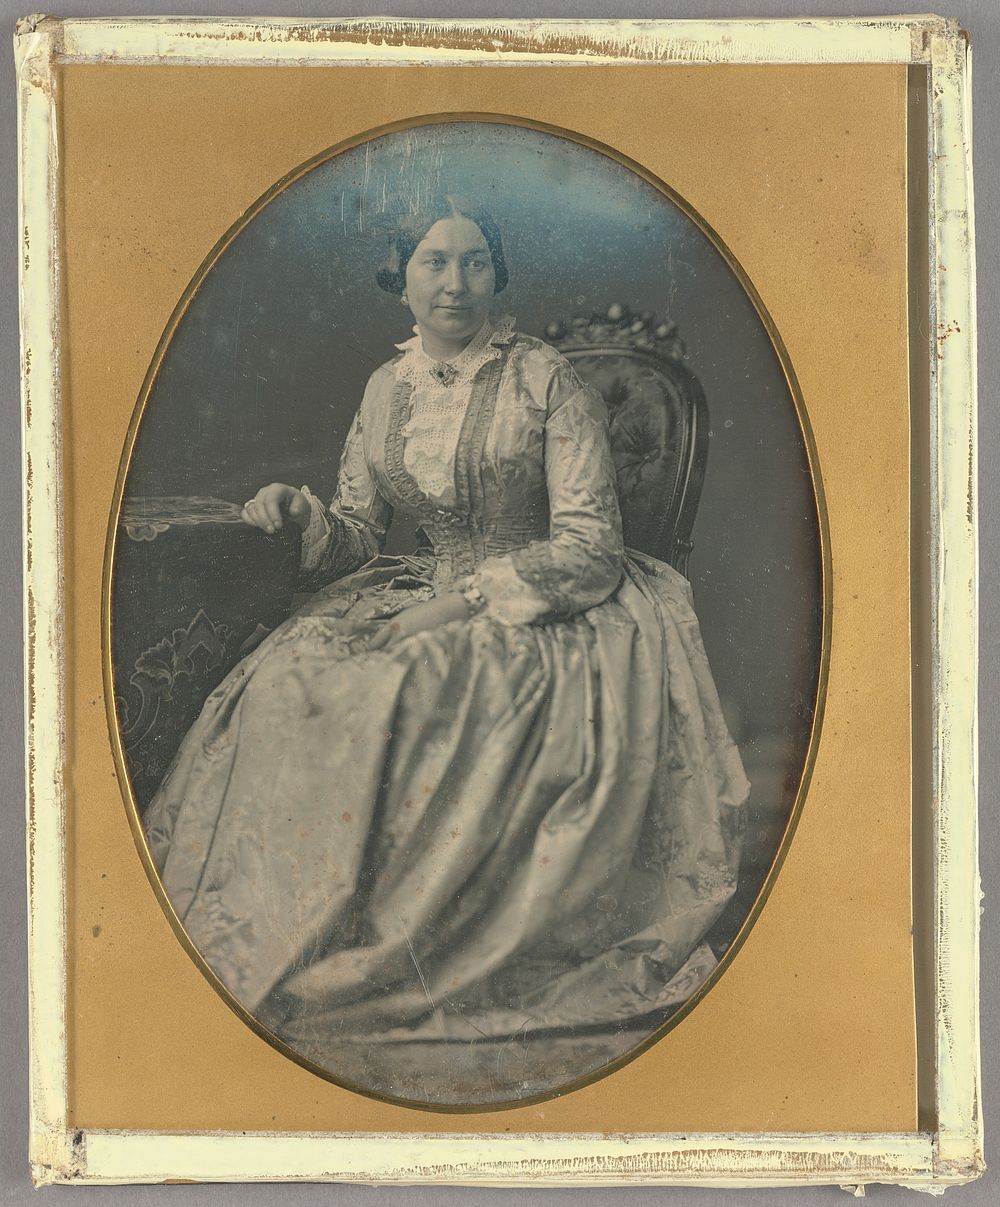 Portrait of a Seated Woman in Long, Flowing Dress